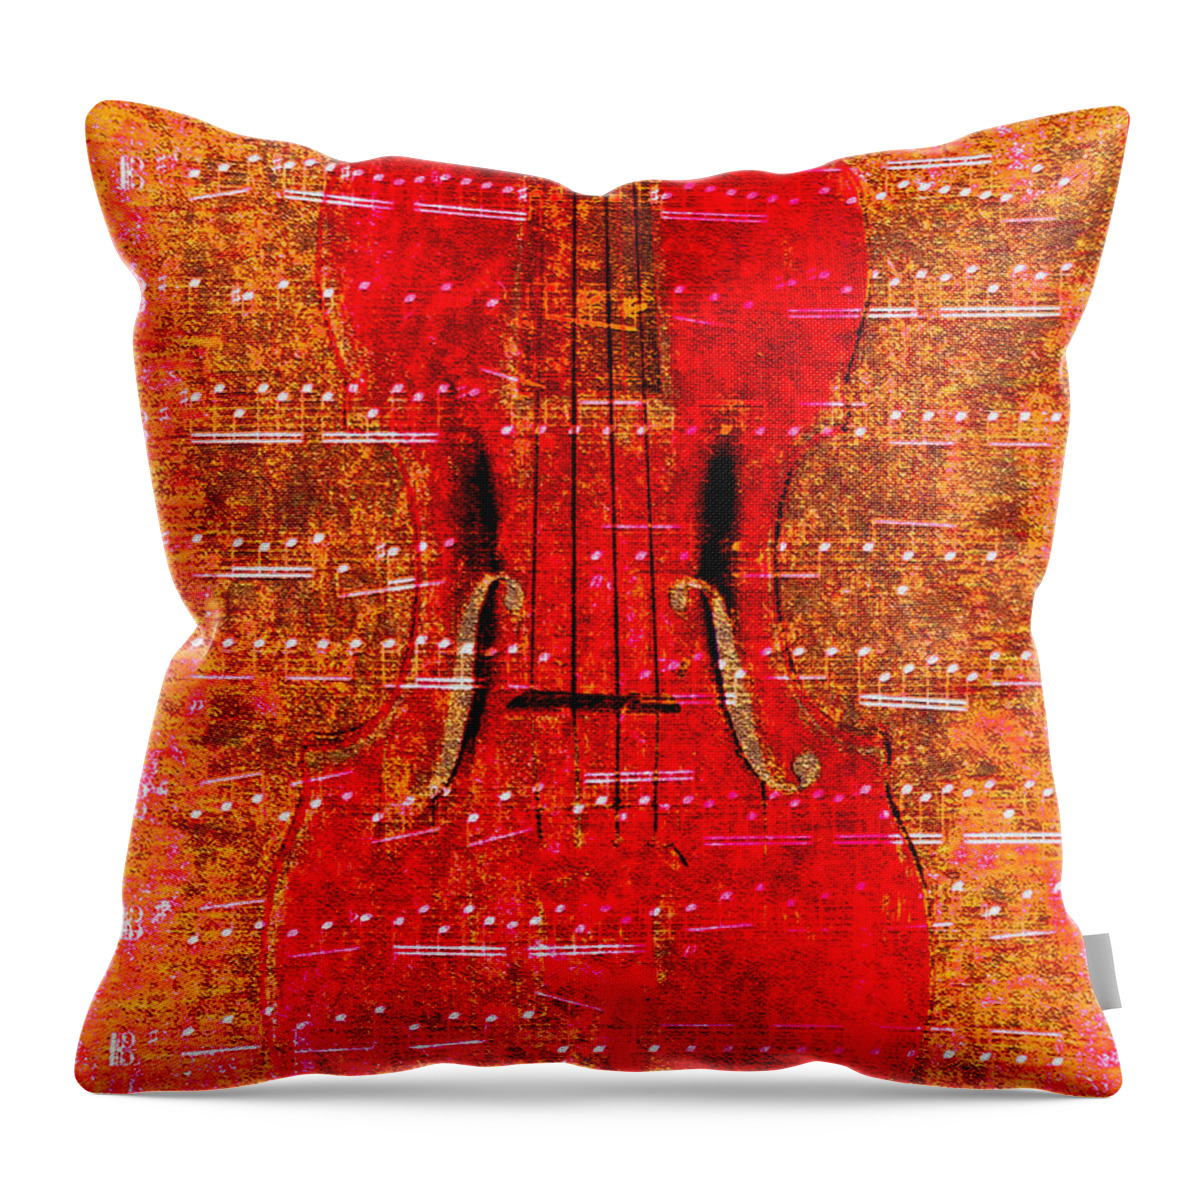 Classical Music Throw Pillow featuring the digital art Viola Red by John Vincent Palozzi